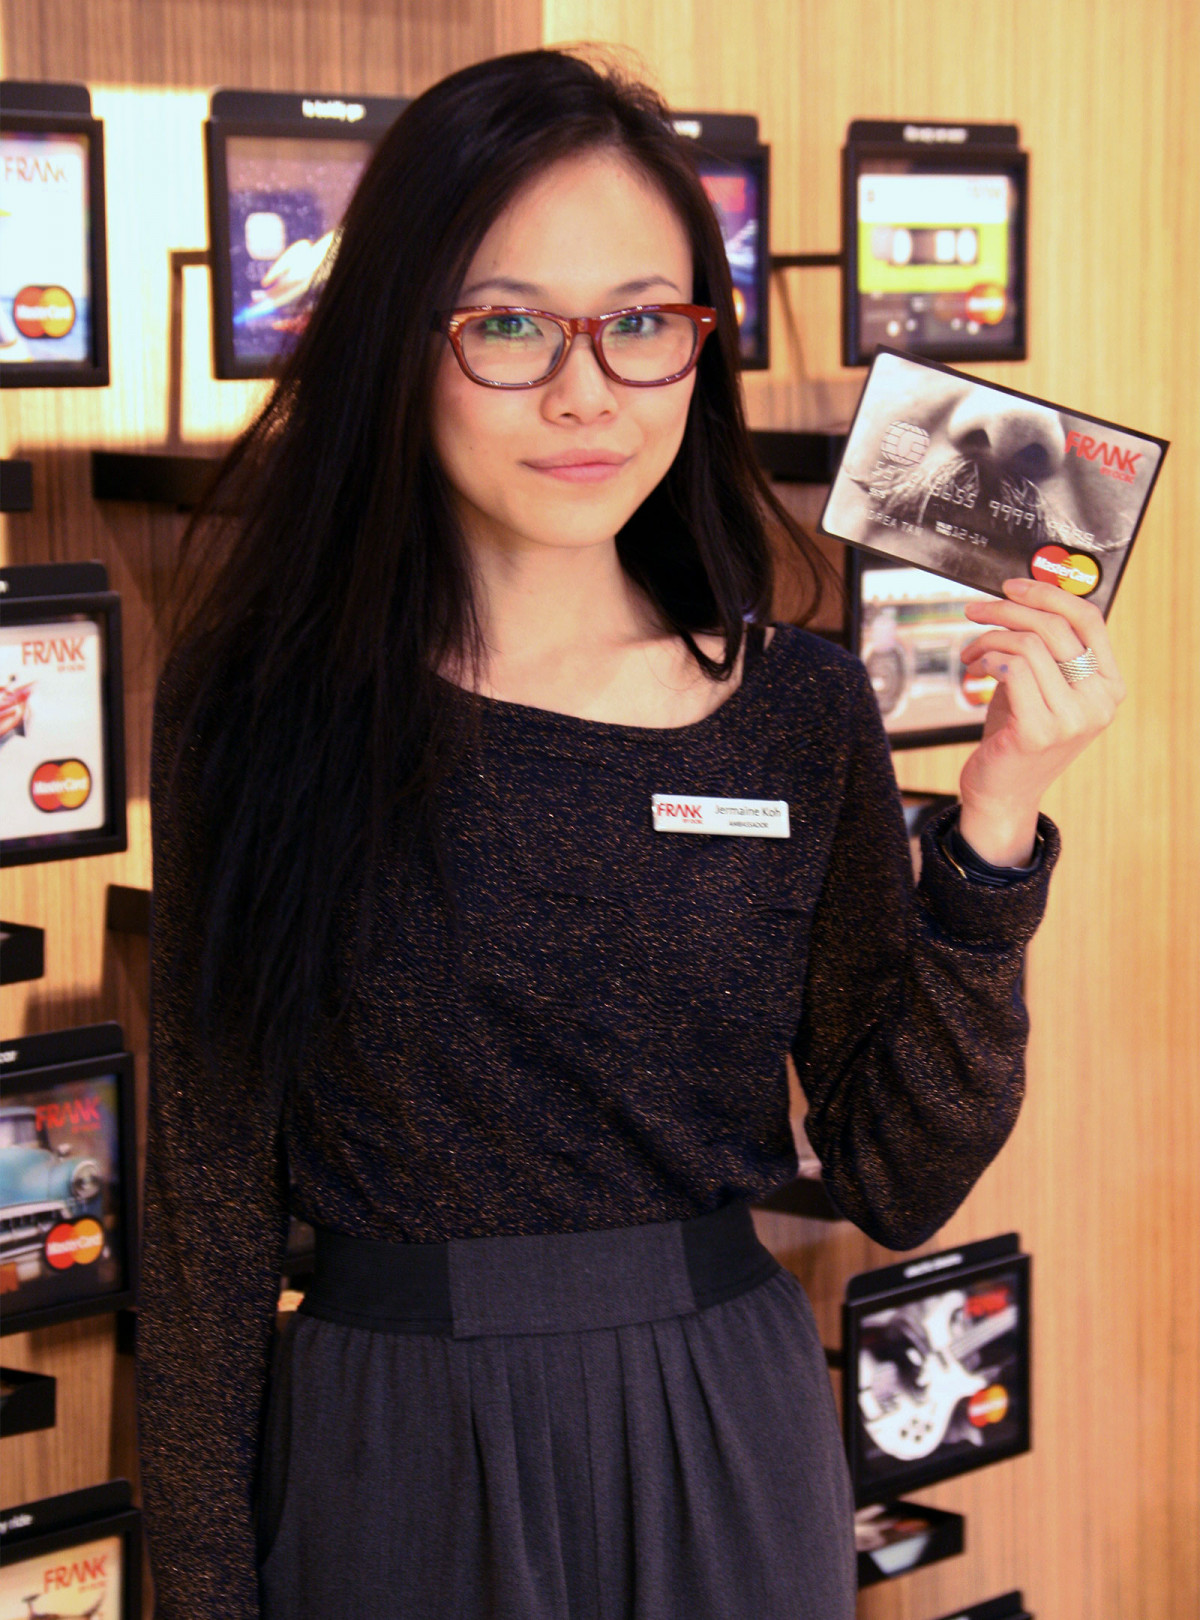 A woman poses with a FRANK by OCBC card design at the brand’s launch event